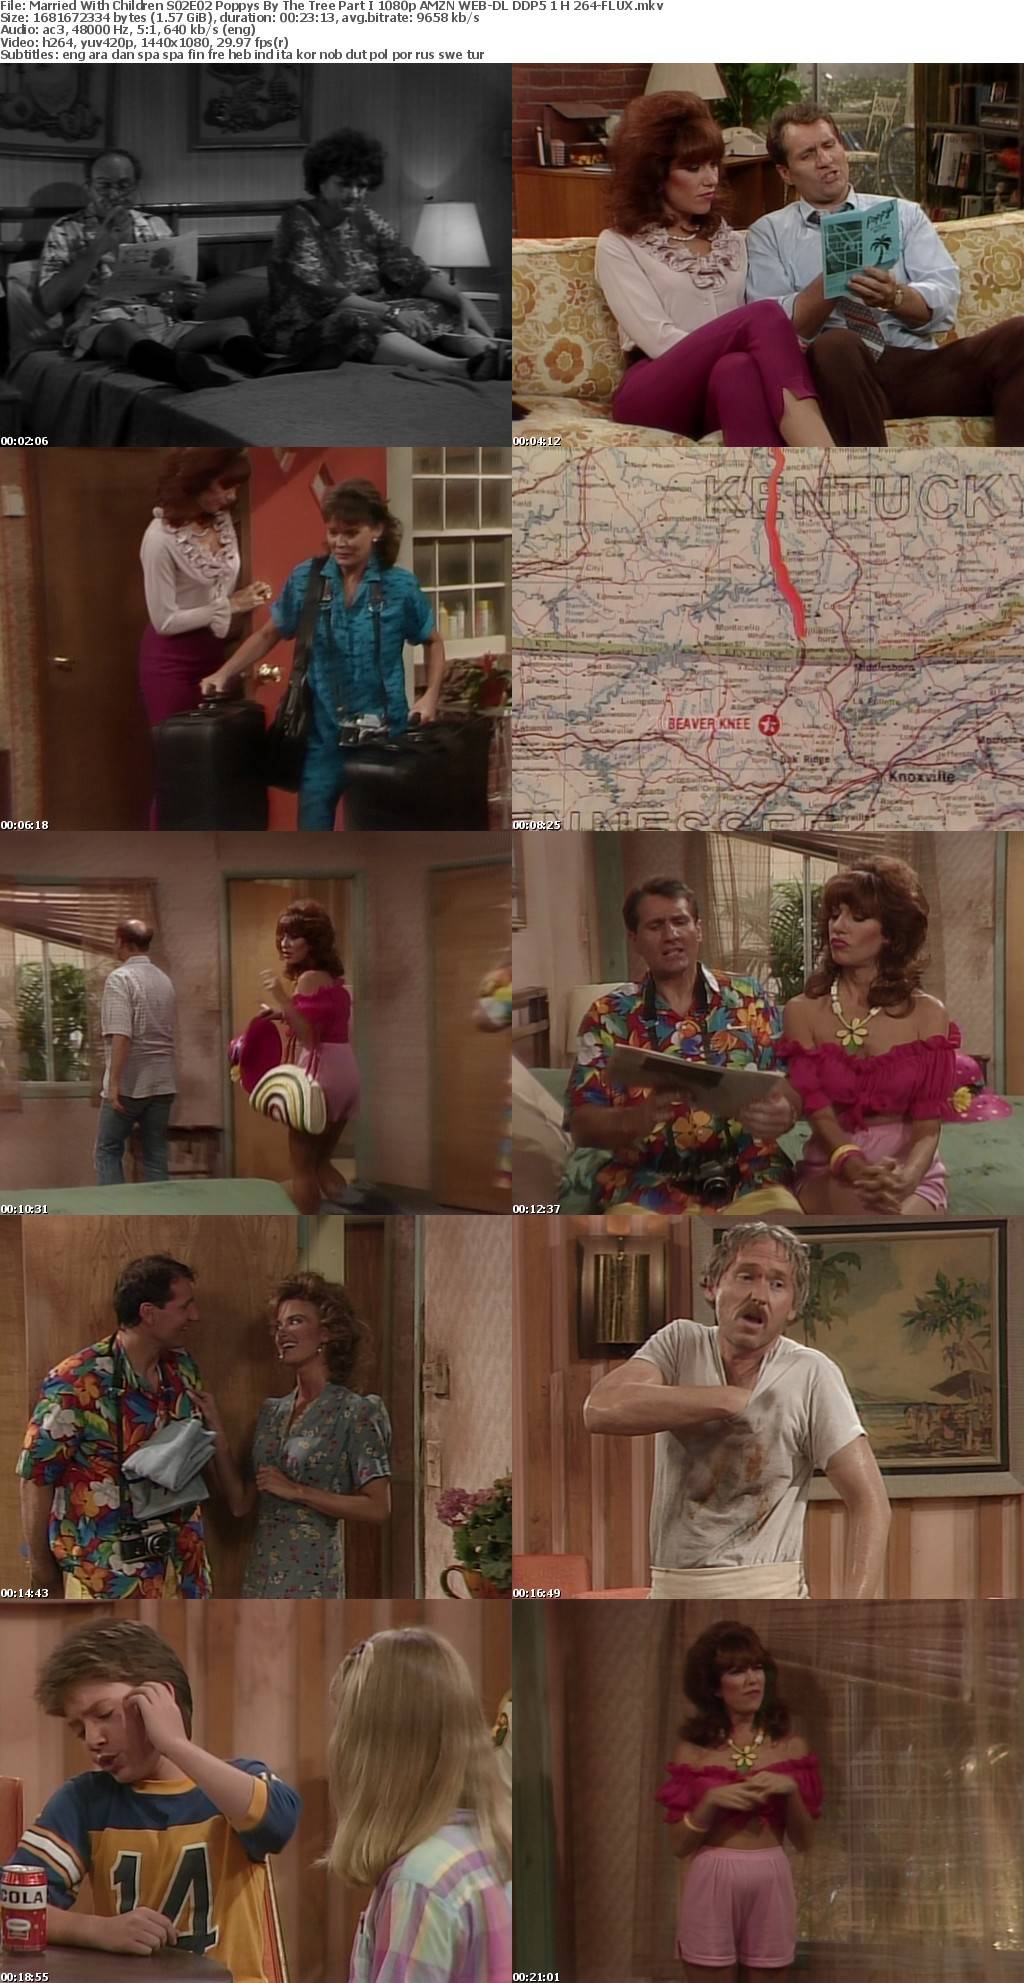 Married With Children S02E02 Poppys By The Tree Part I 1080p AMZN WEB-DL DDP5 1 H 264-FLUX